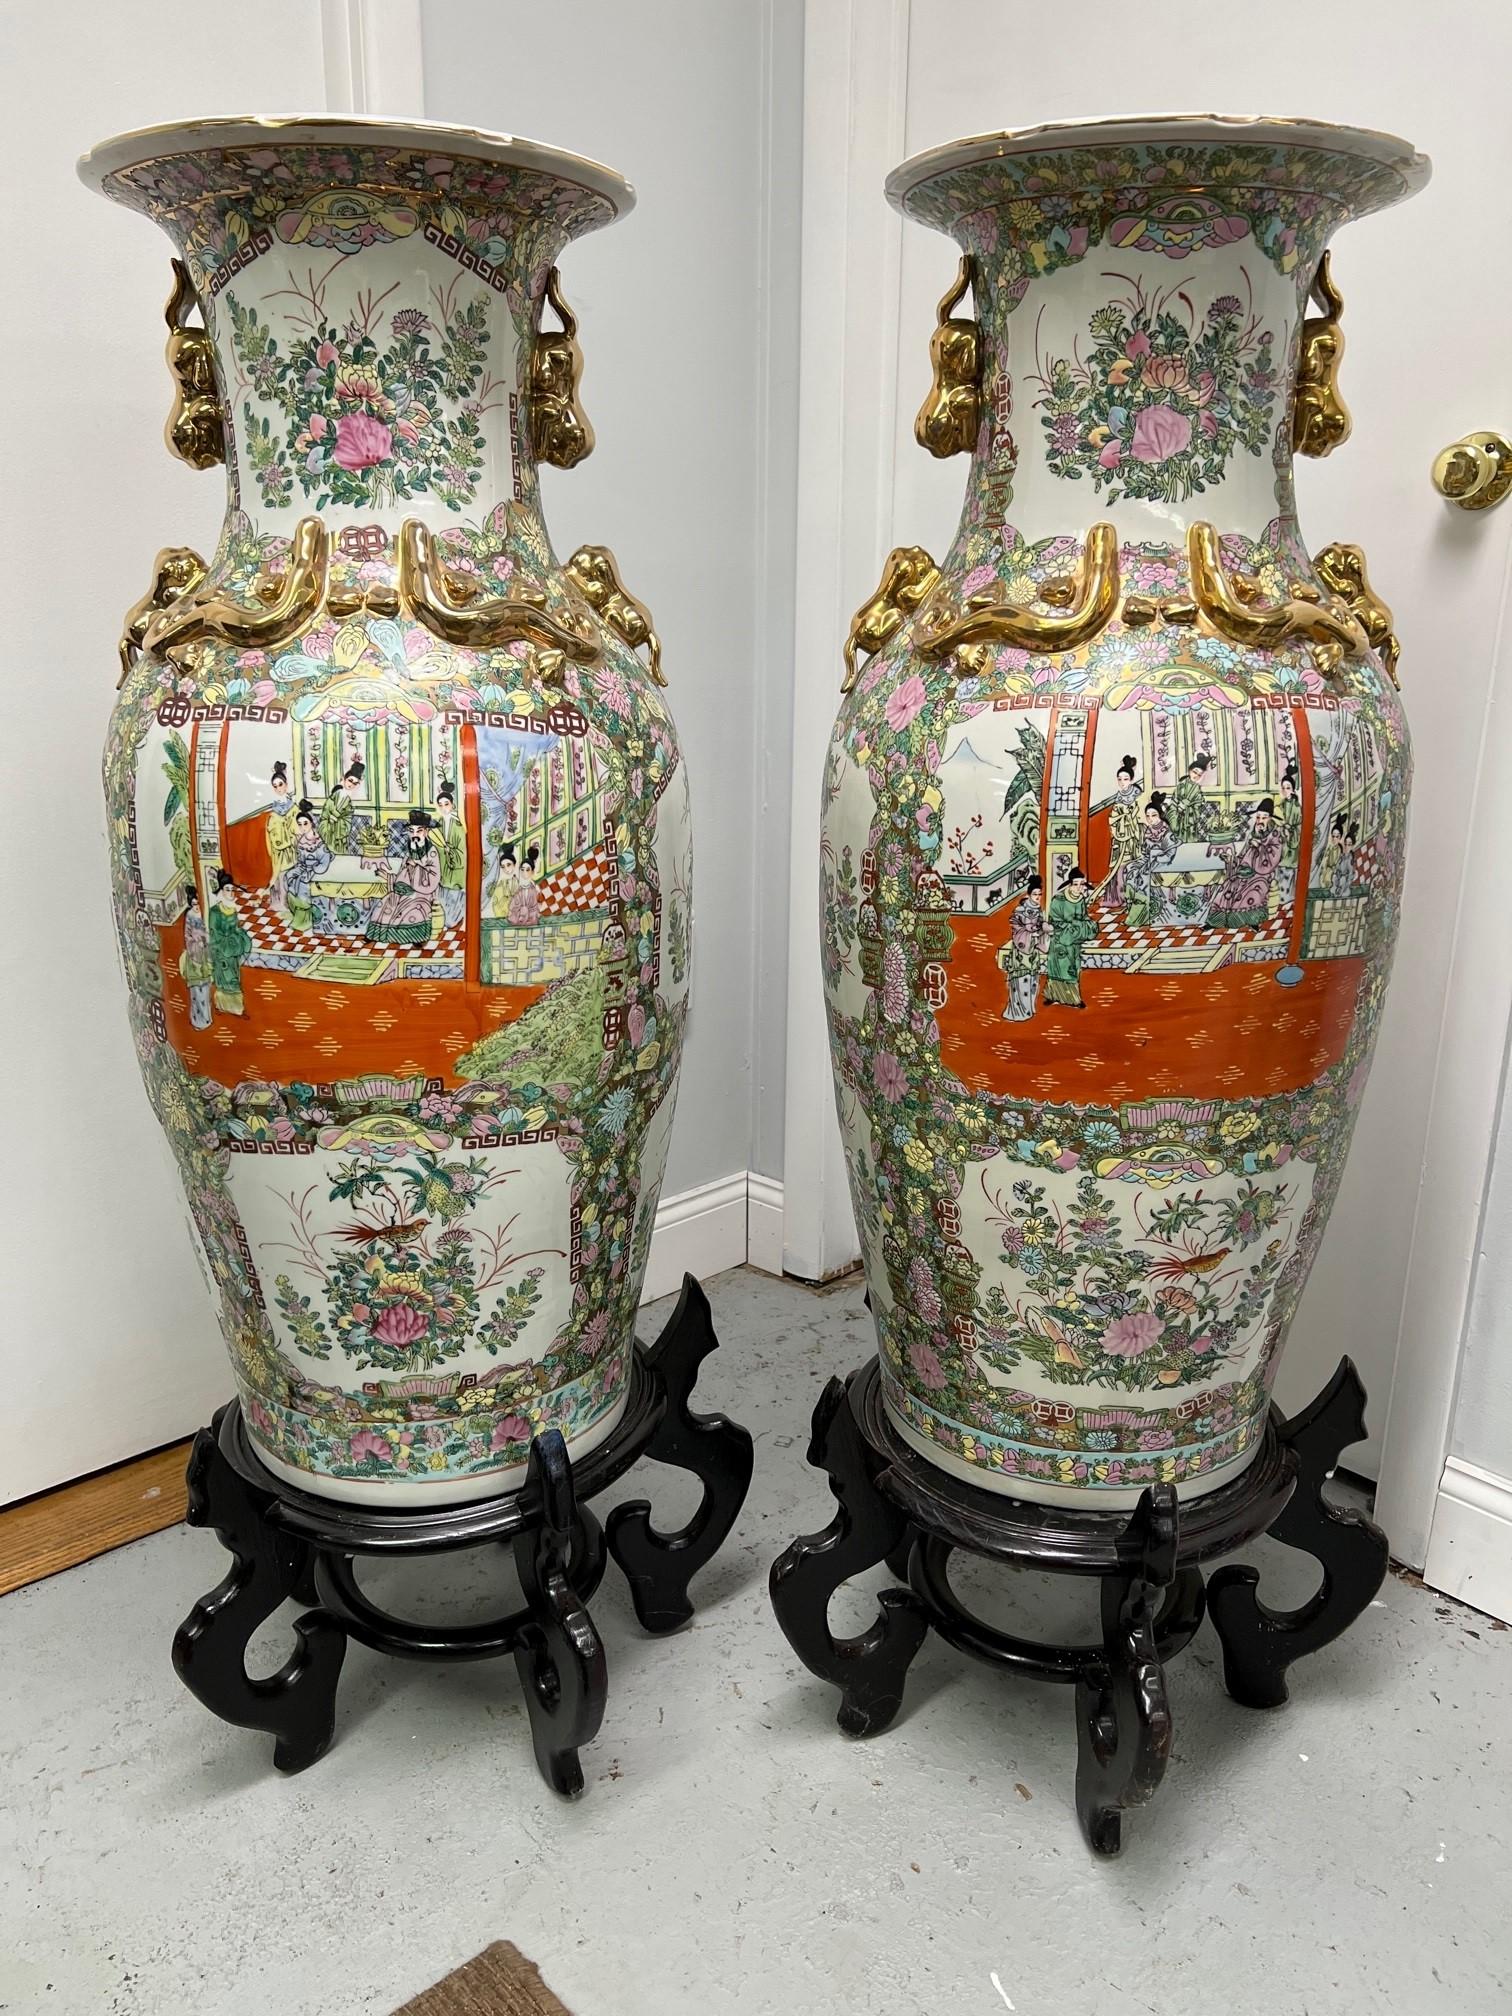 Beautiful pair of hand painted porcelain vases in the style of the Qing Dynasty each with two panels of hand painted figures. The vases sit on top of wood pedestals that would look great as accent pieces in any room of your home. Sold only as a pair